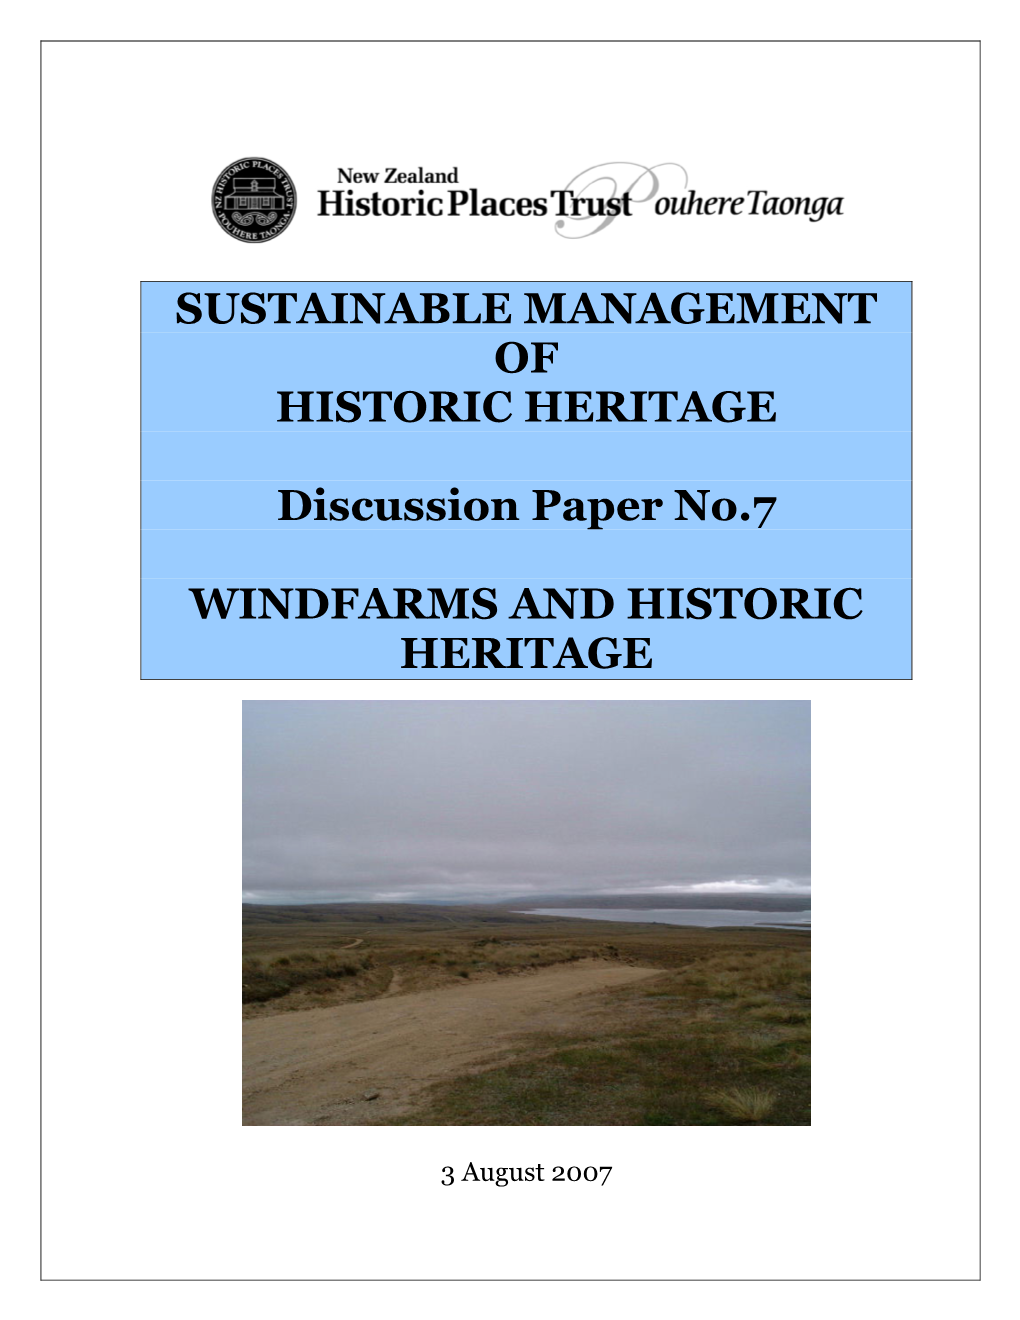 Wind Farms and Historic Heritage Guidelines